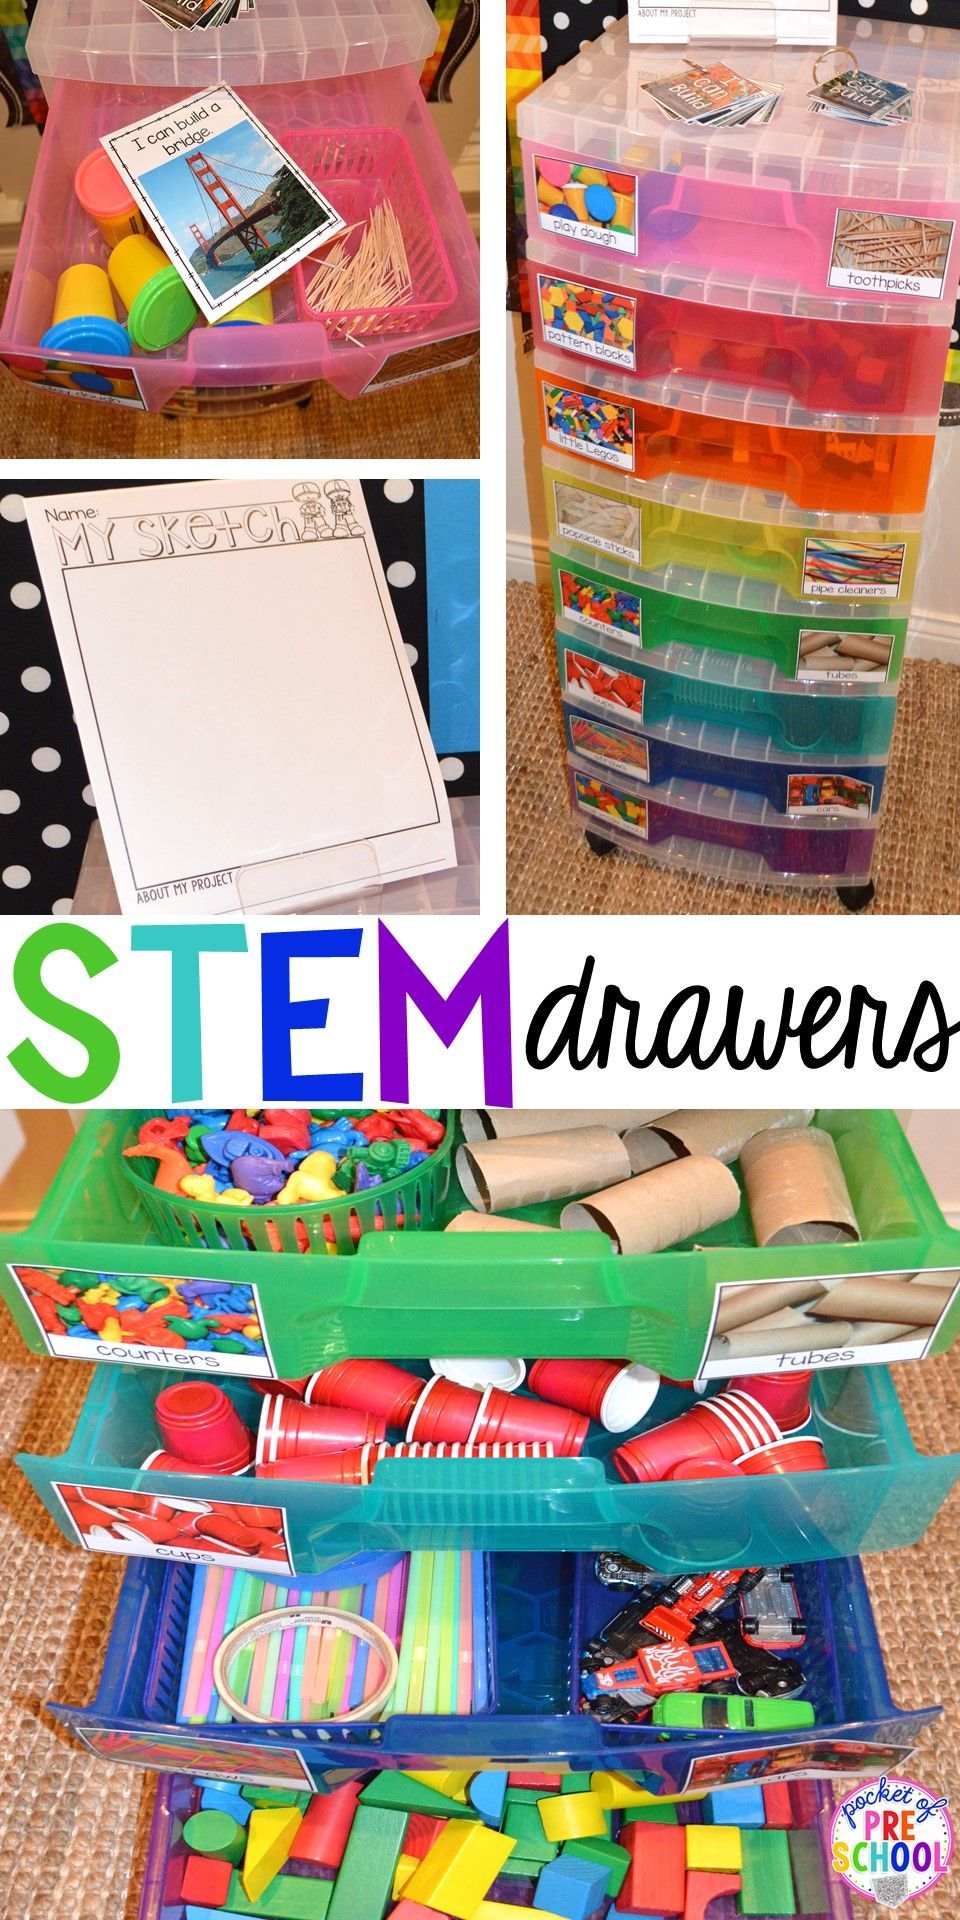 STEM drawers are a simple, easy to implement STEM activities even if you have a sm